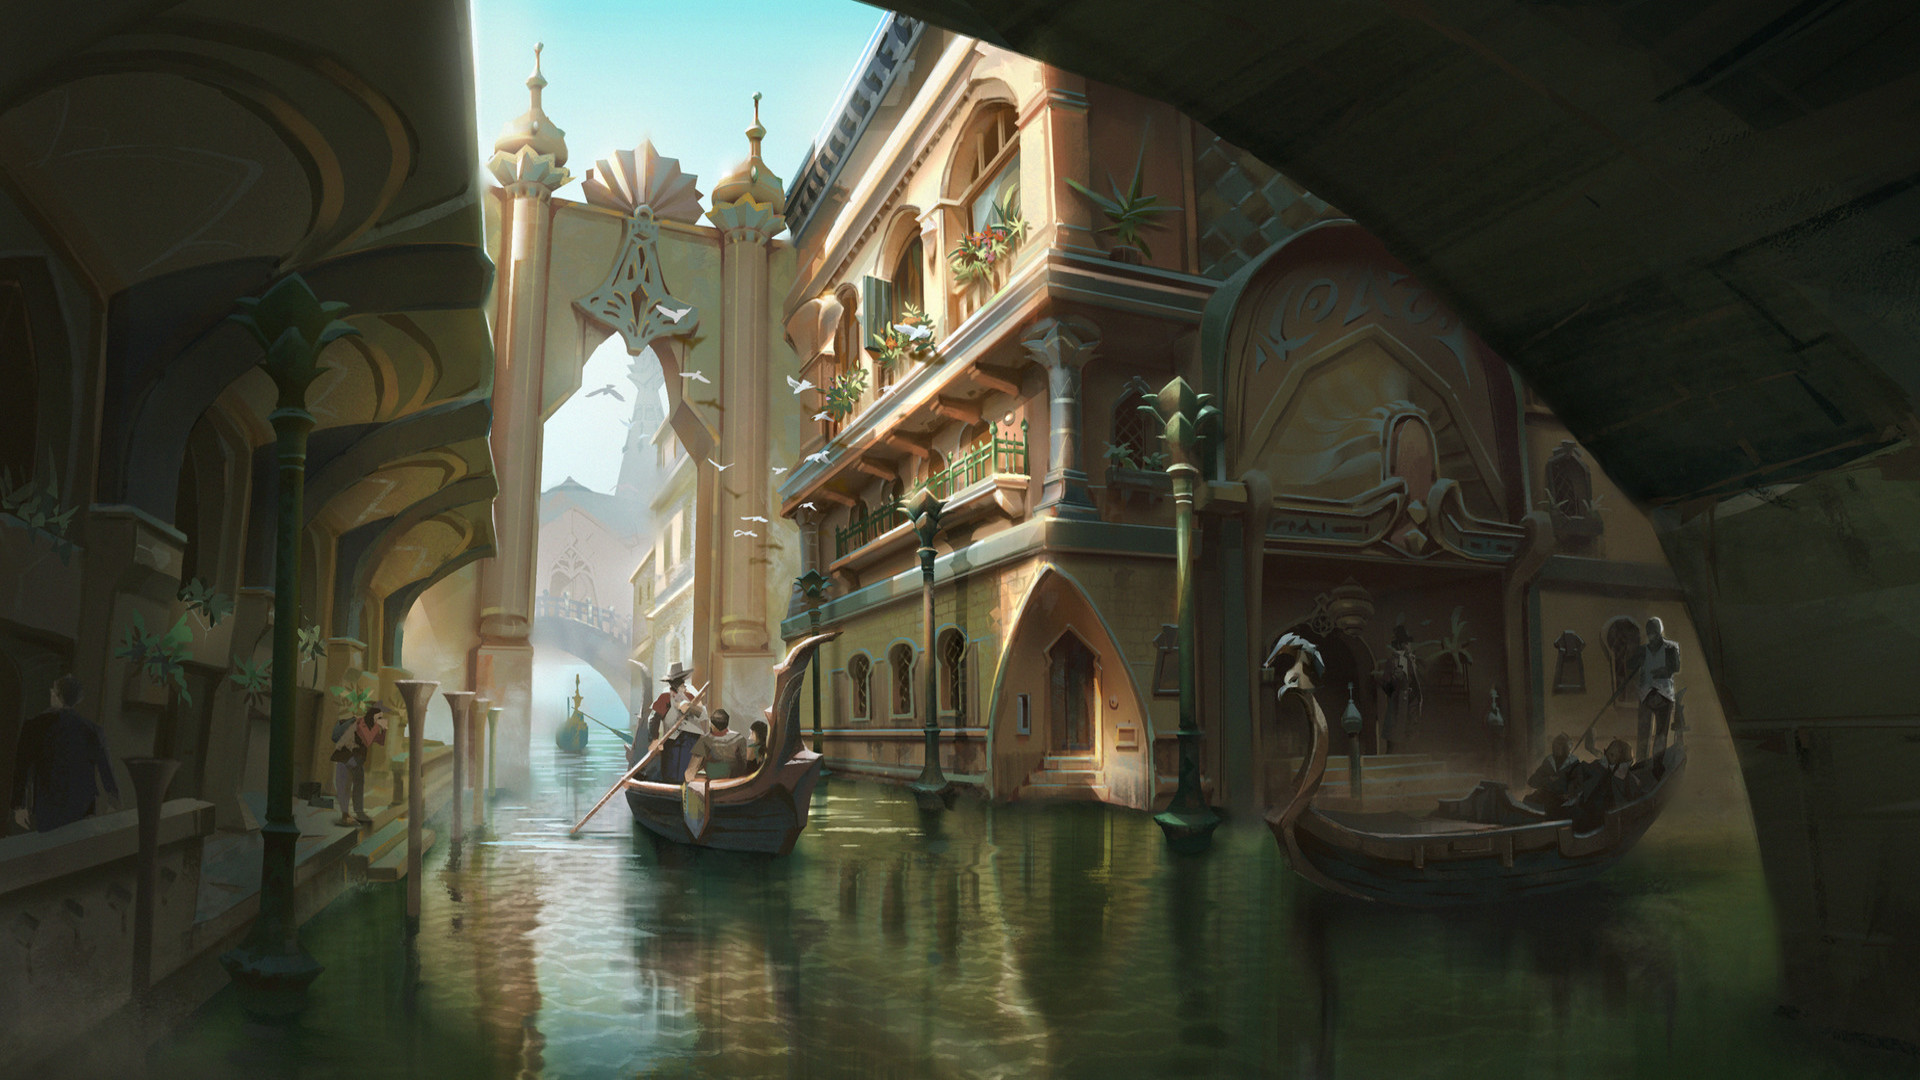 The City of Water by Qiao Yun